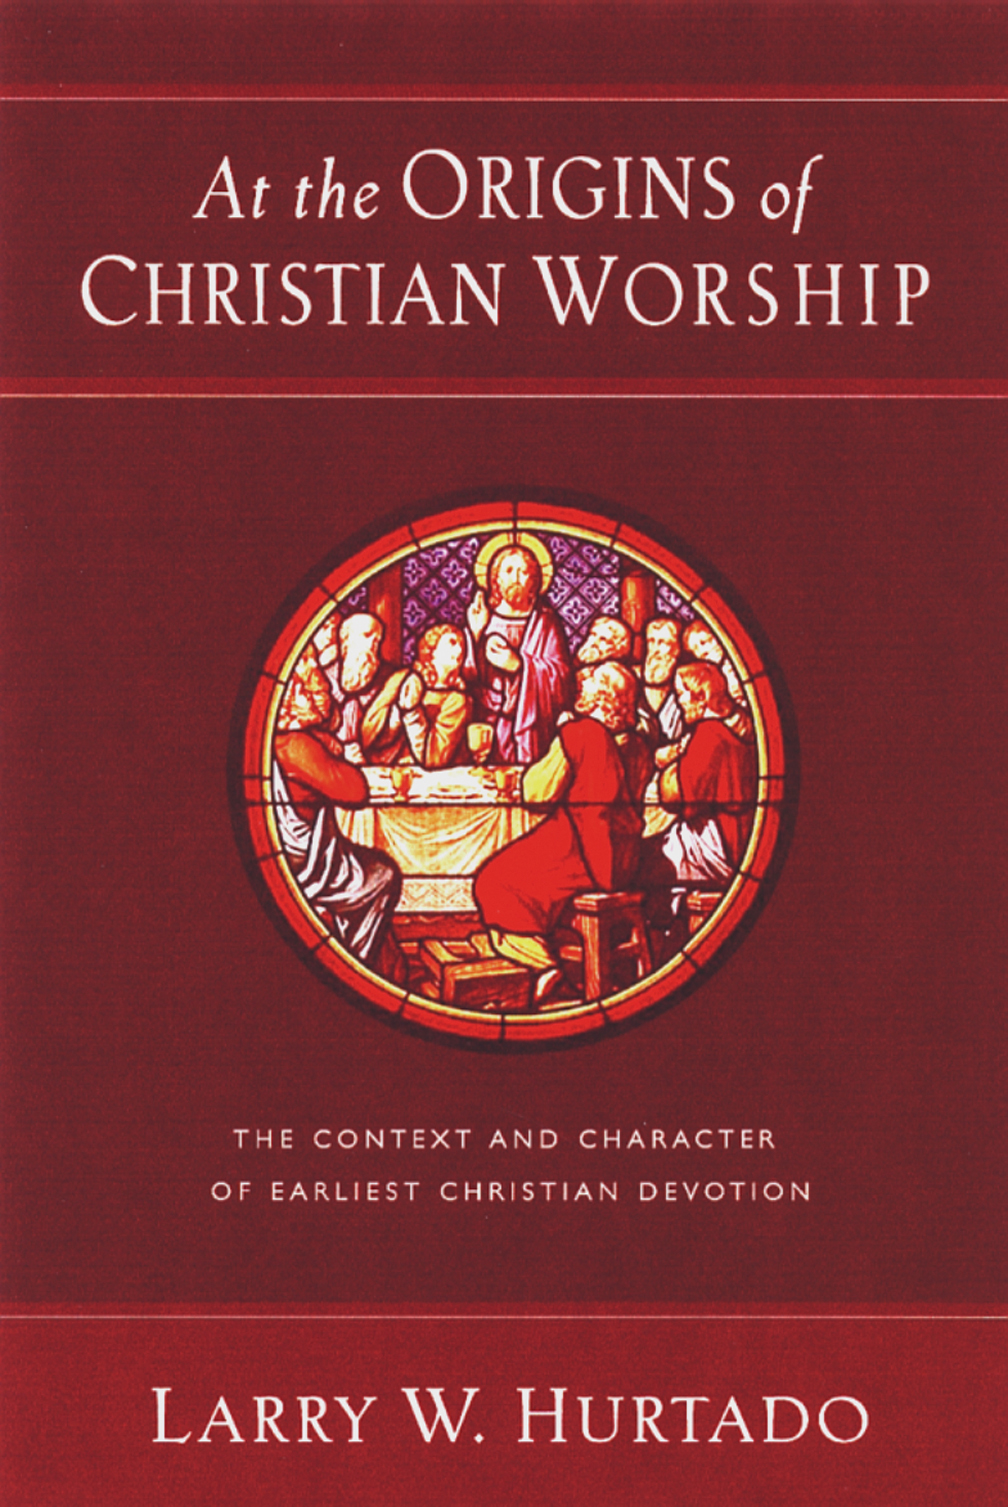 At the Origins of Christian Worship